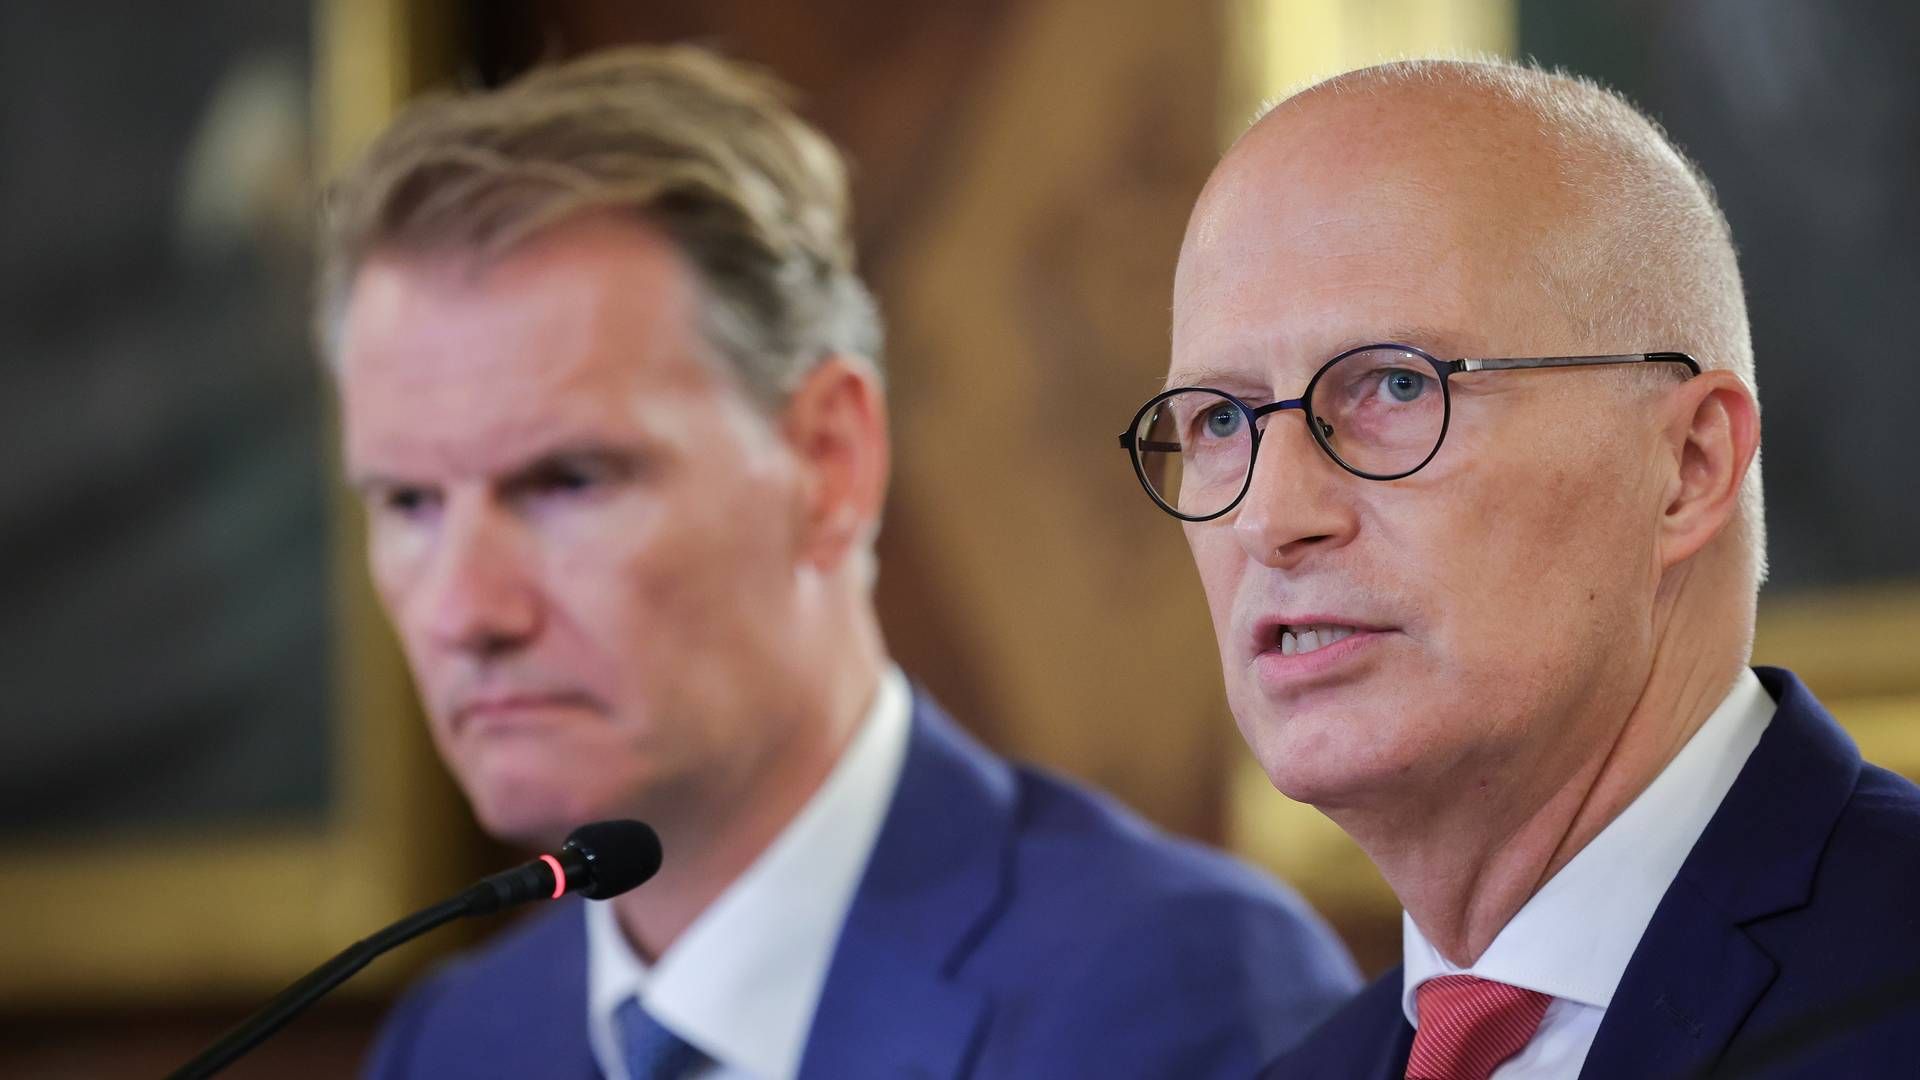 The agreement was presented at a press conference in September, where MSC's CEO, Søren Toft, participated together with the mayor of Hamburg, Peter Tschentscher. | Photo: Christian Charisius/AP/Ritzau Scanpix